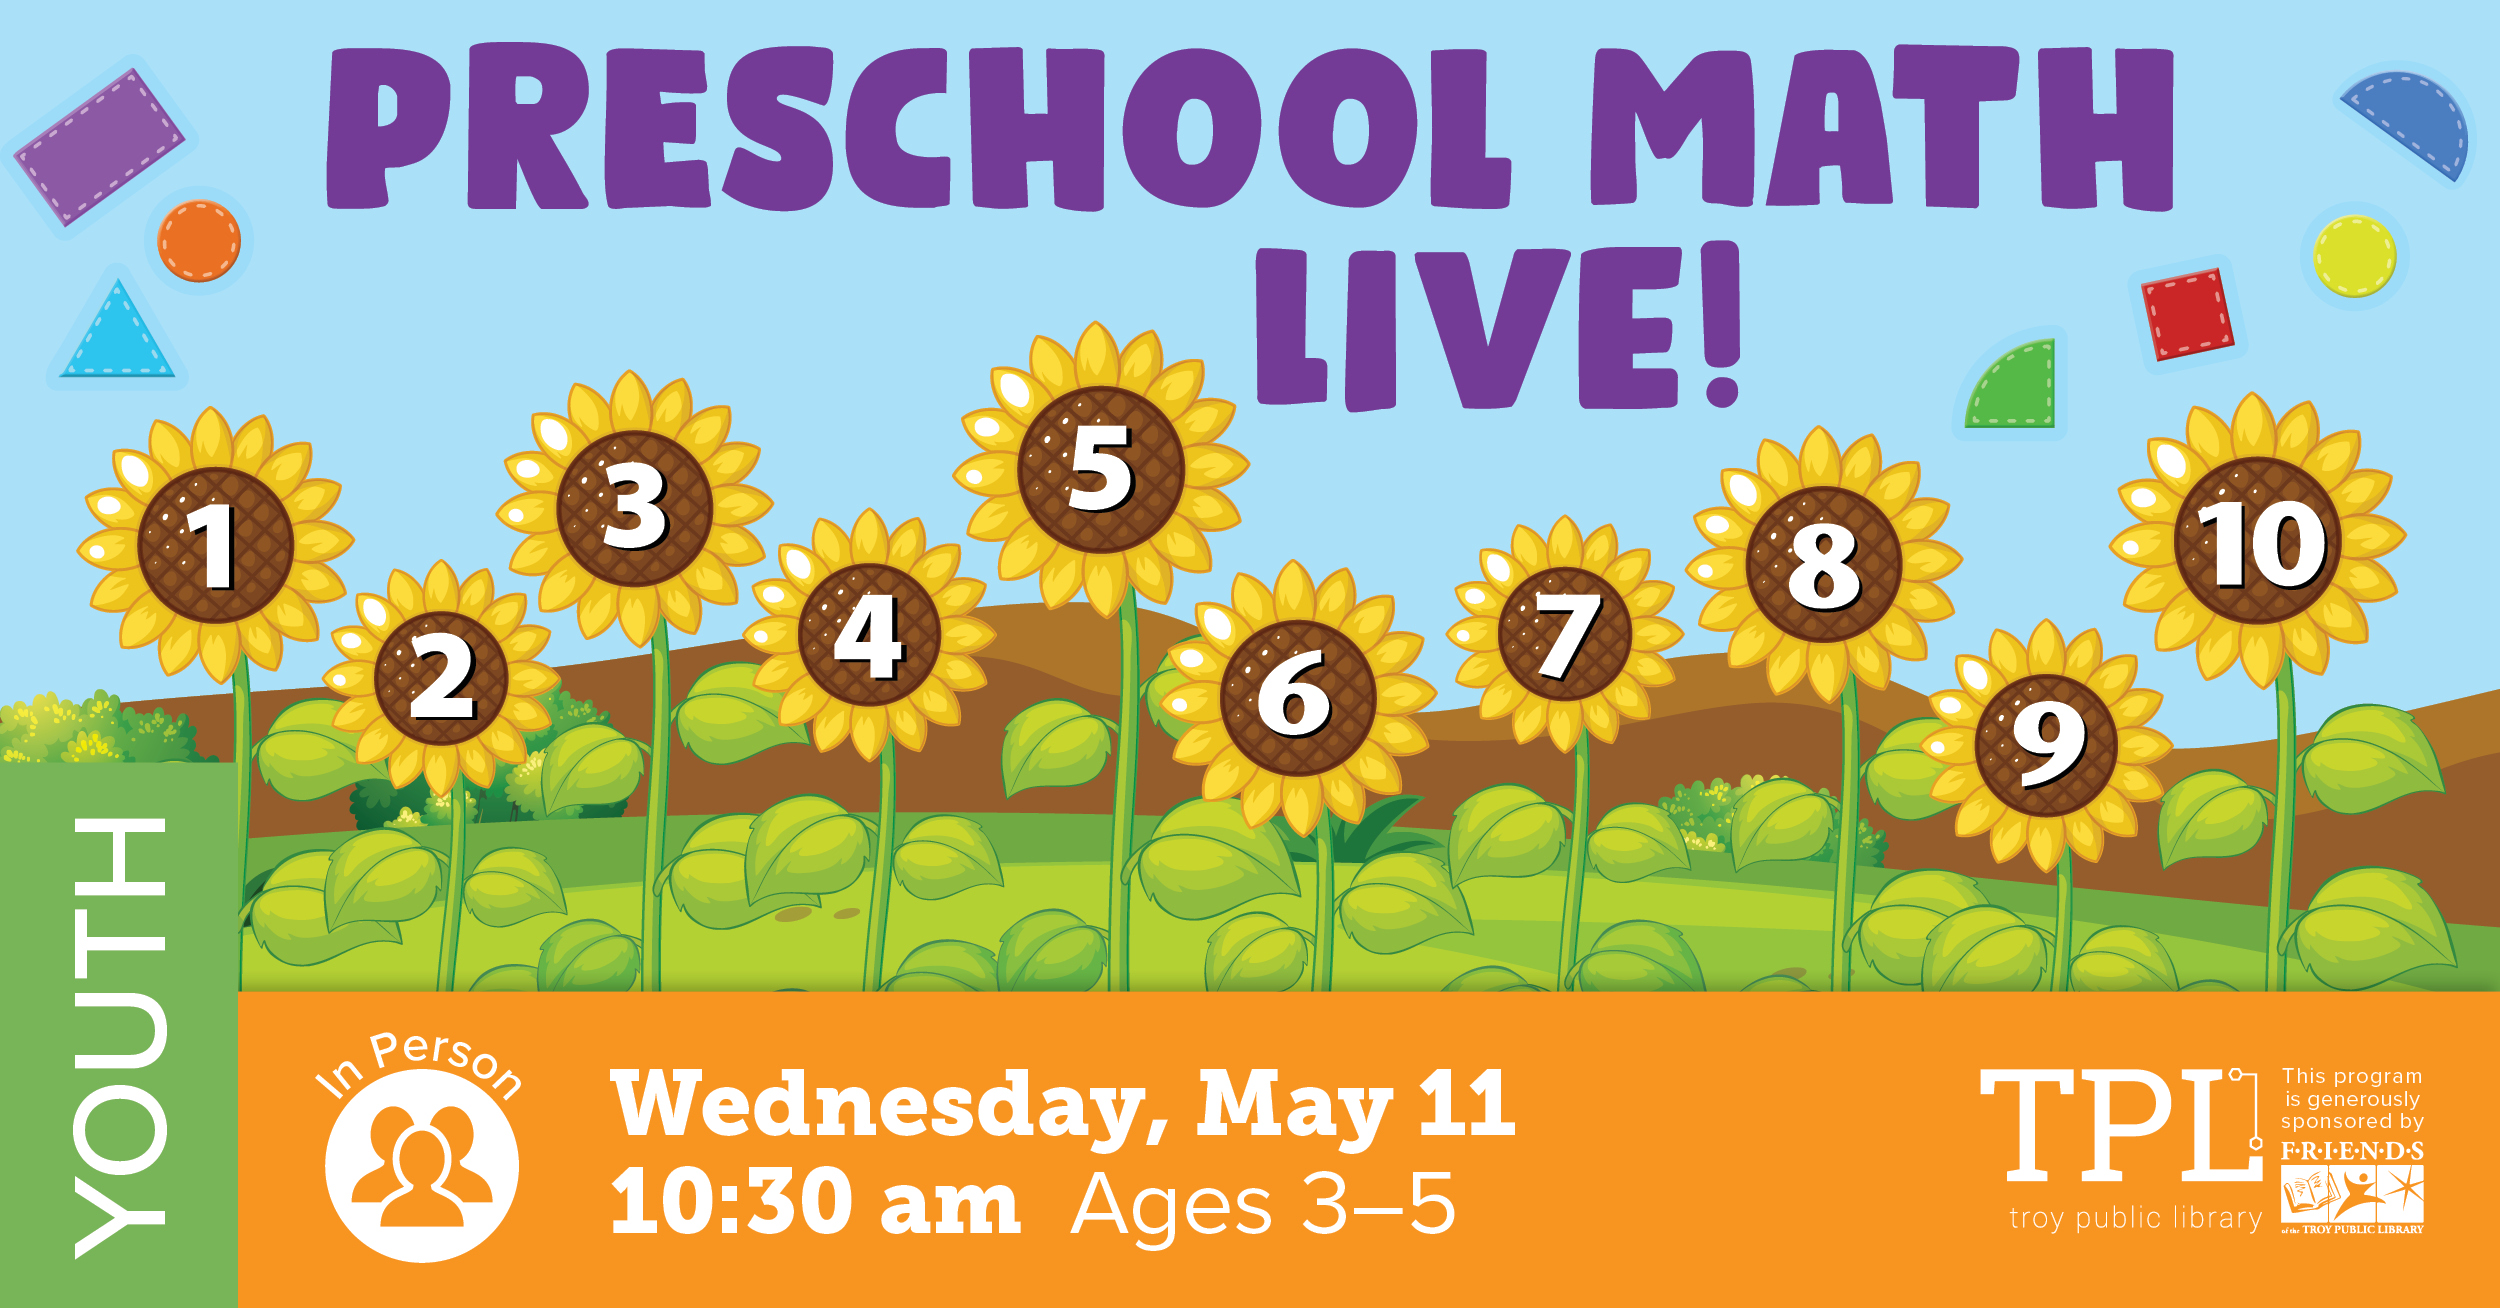 Preschool Math Live In-person Wednesday, May 11 at 10:30am ages 3 to 5. Sponsored by the Friends of the Troy Public Library